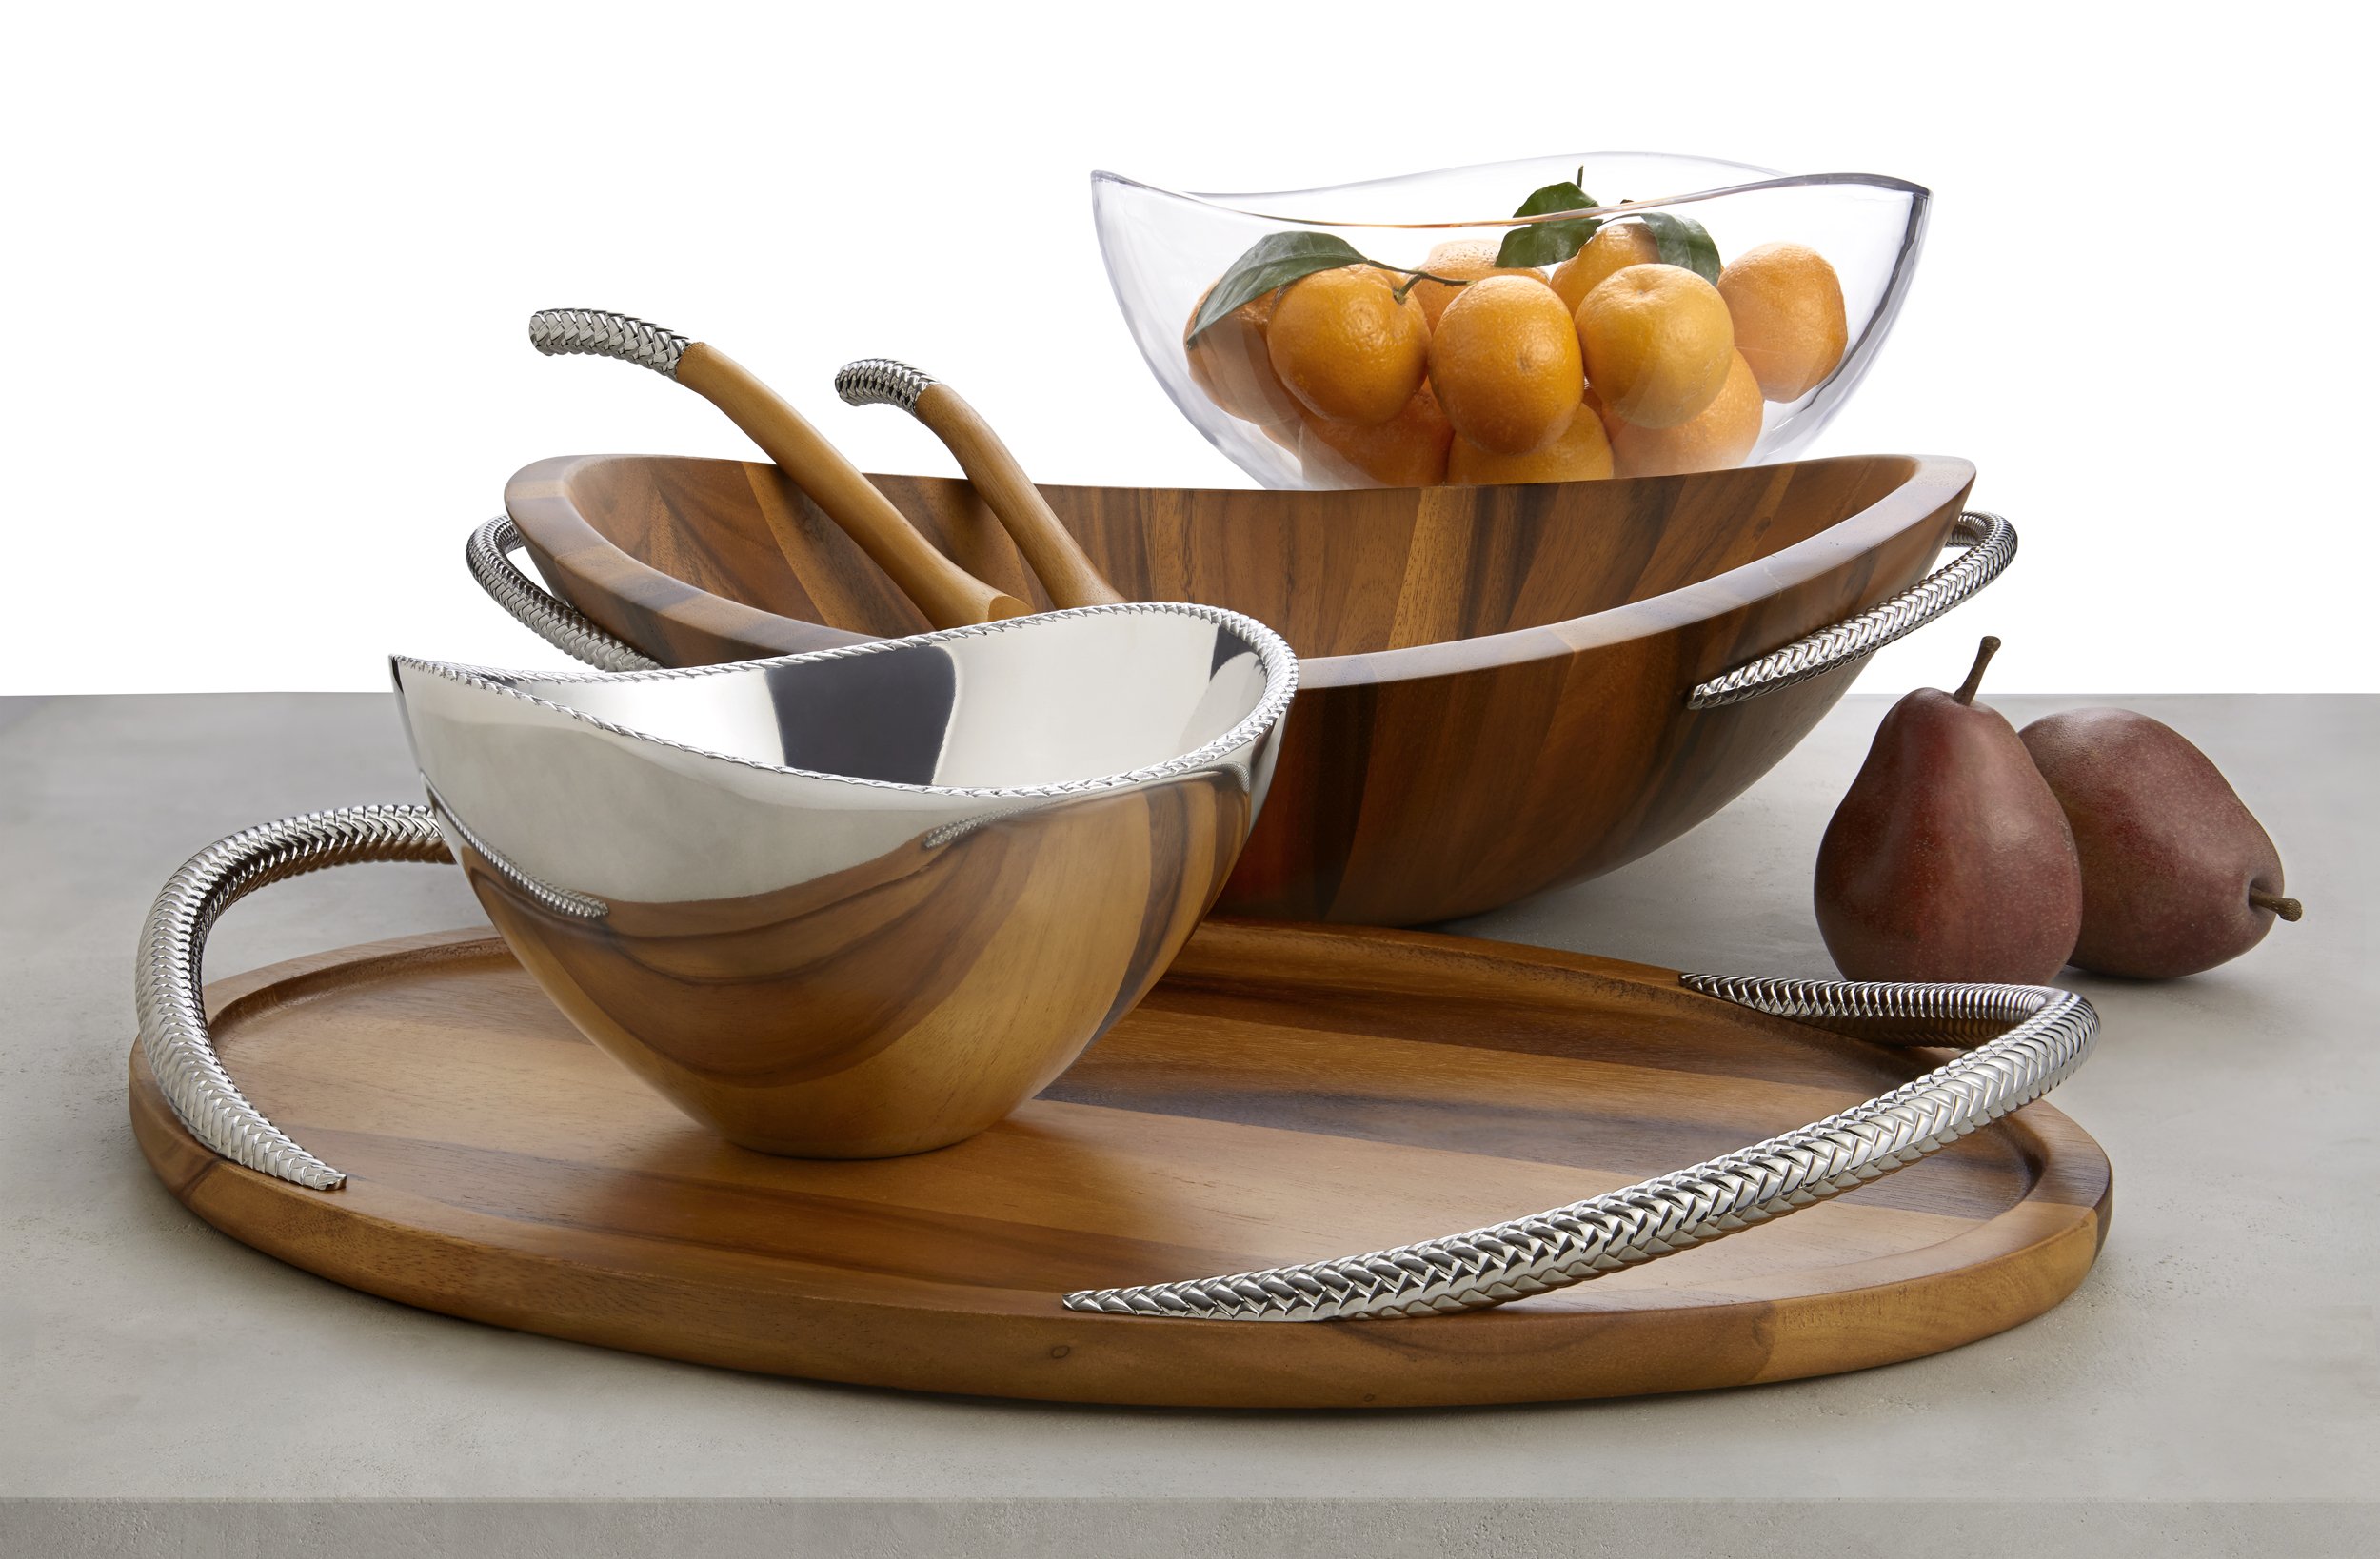 nambe Pulse Salad Bowl w/Servers | Large 13 Inch Salad Bowl with Serving Utensils | 3 Piece Decorative Wooden Salad Bowl Set | Made of Stainless Steel and Acacia Wood | Bowl is Dishwasher Safe